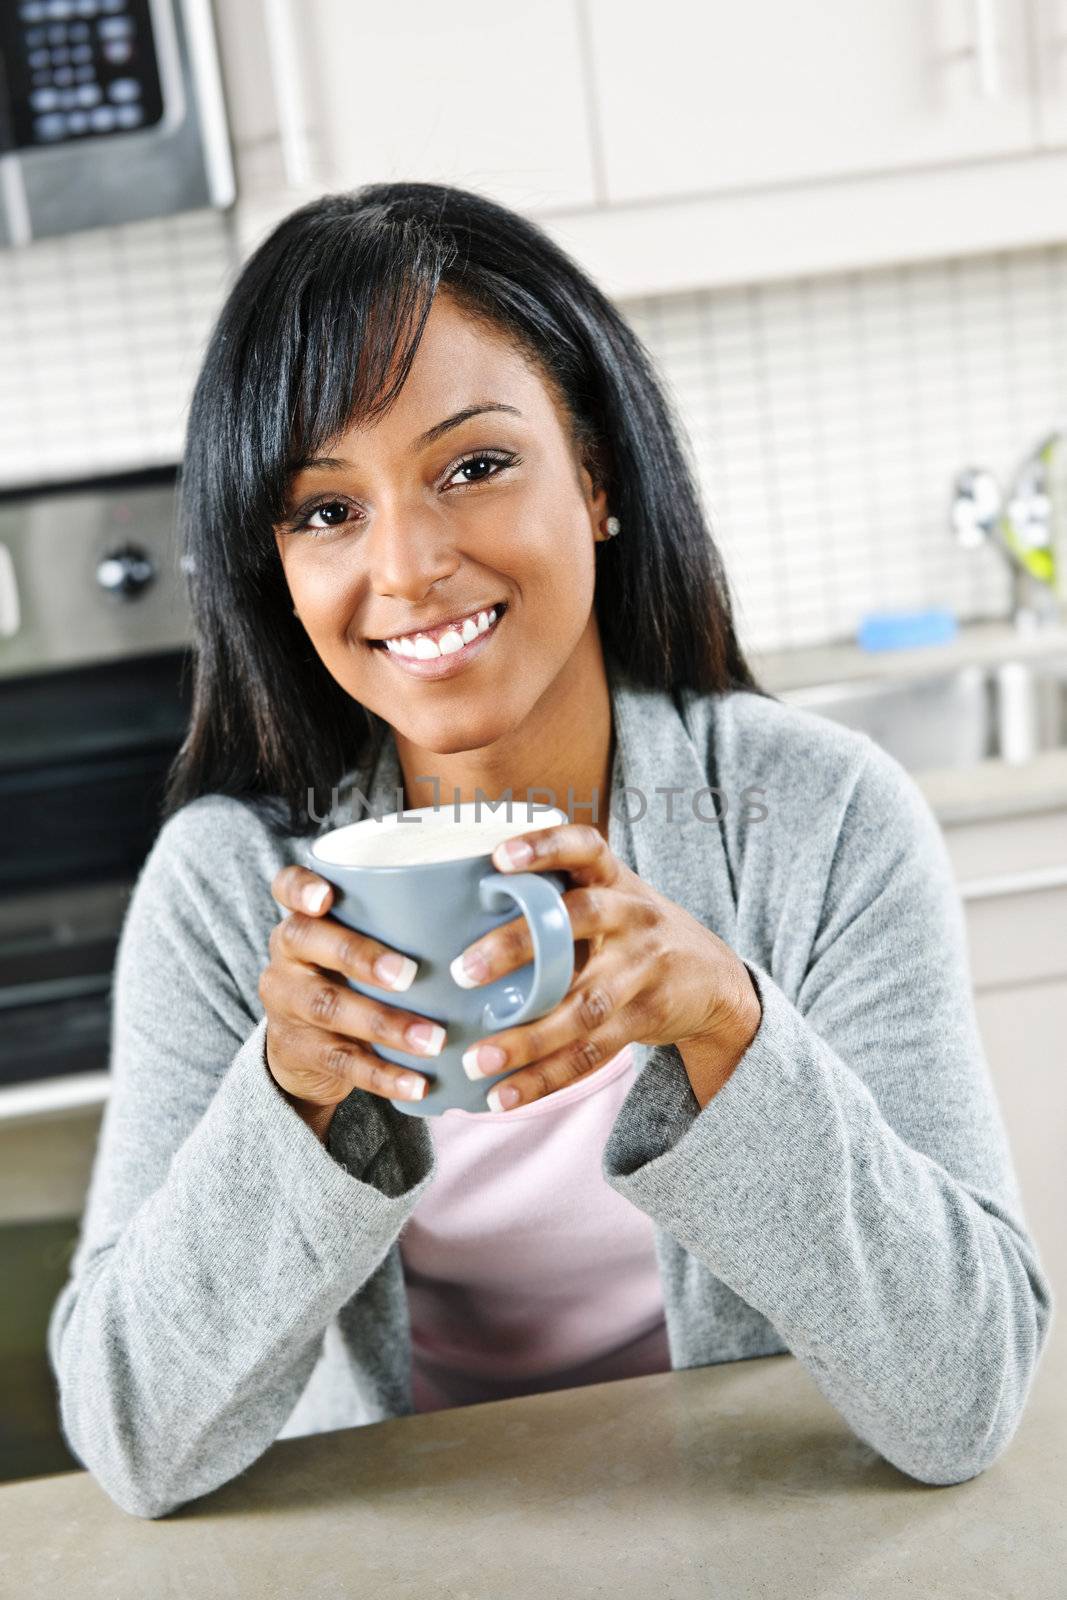 Smiling black woman holding coffee cup in modern kitchen interior